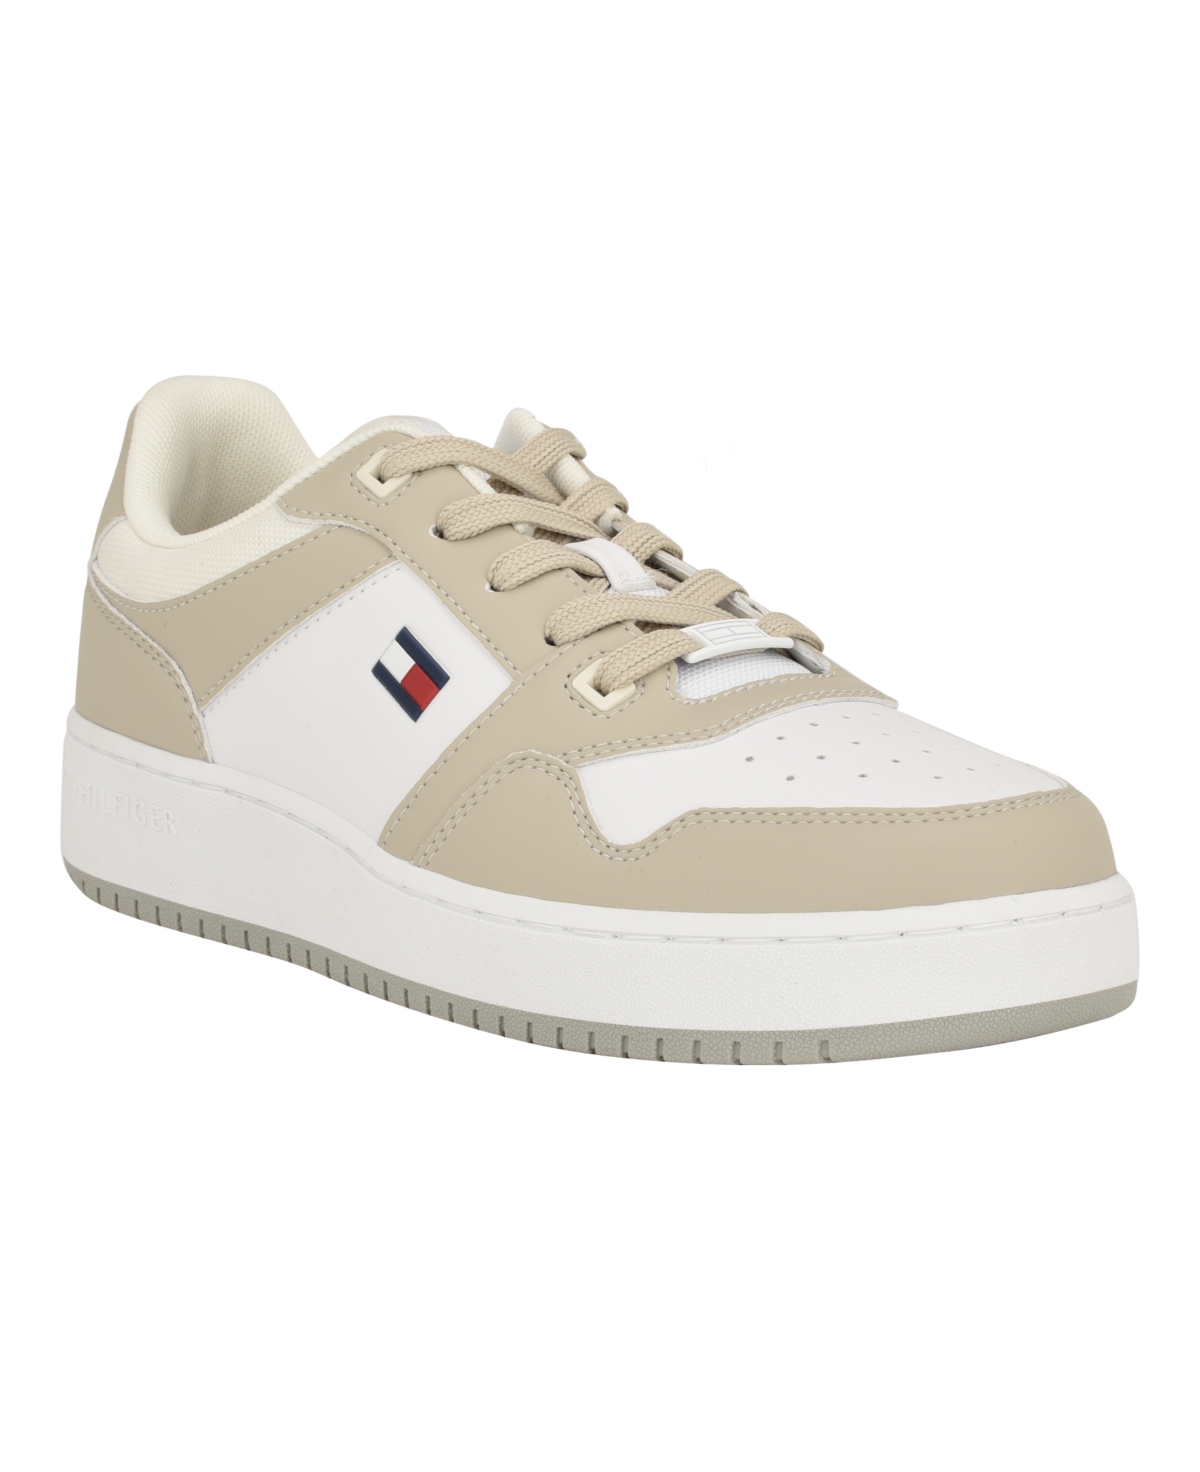 Tommy Hilfiger Men's Krane Lace Up Fashion Sneakers In Light Natural,white